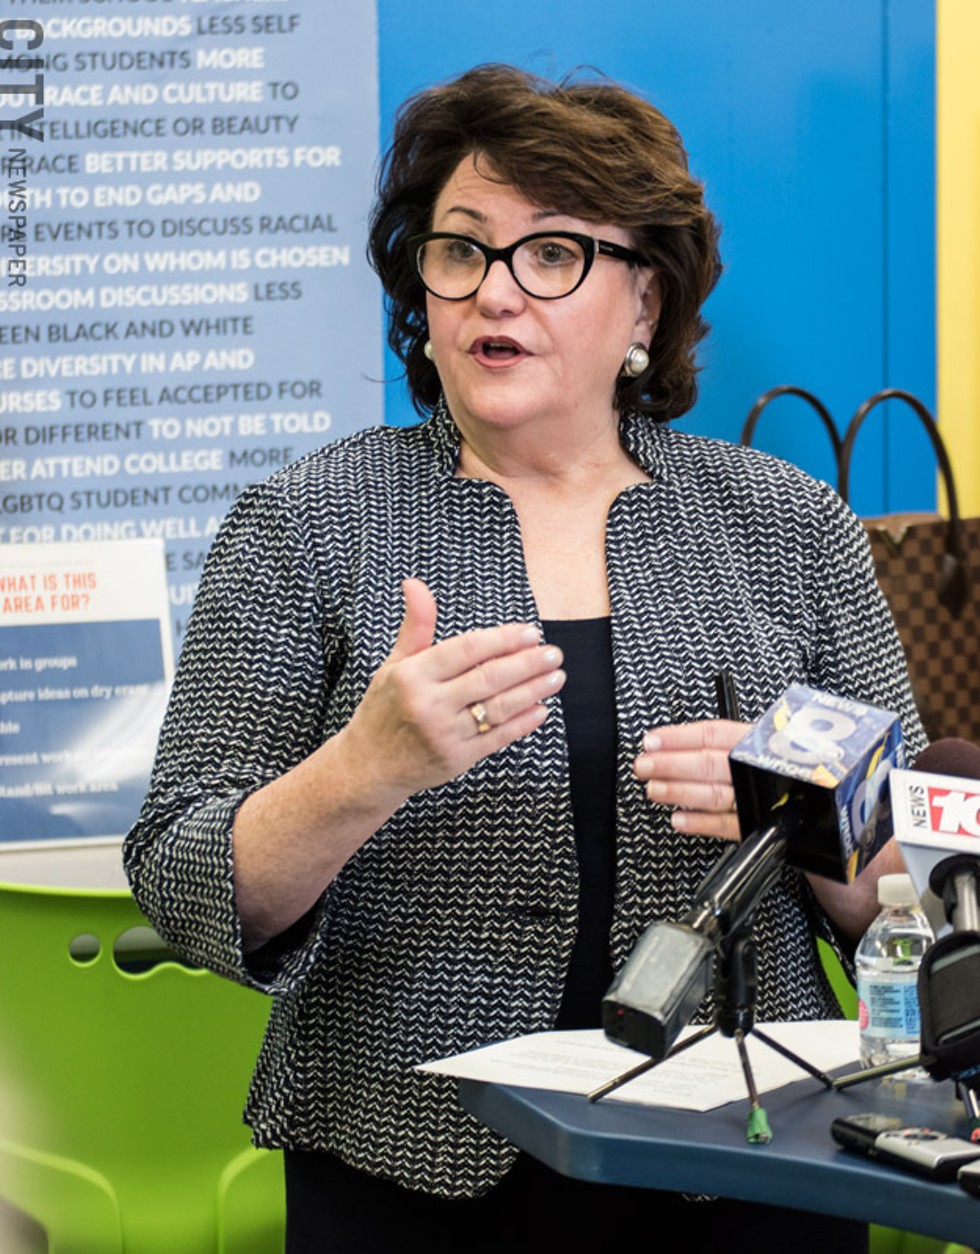 At a press conference last week, State Education Commissioner MaryEllen Elia said the Rochester school district’s operations and low student achievement are “unacceptable.” - PHOTO BY JACOB WALSH